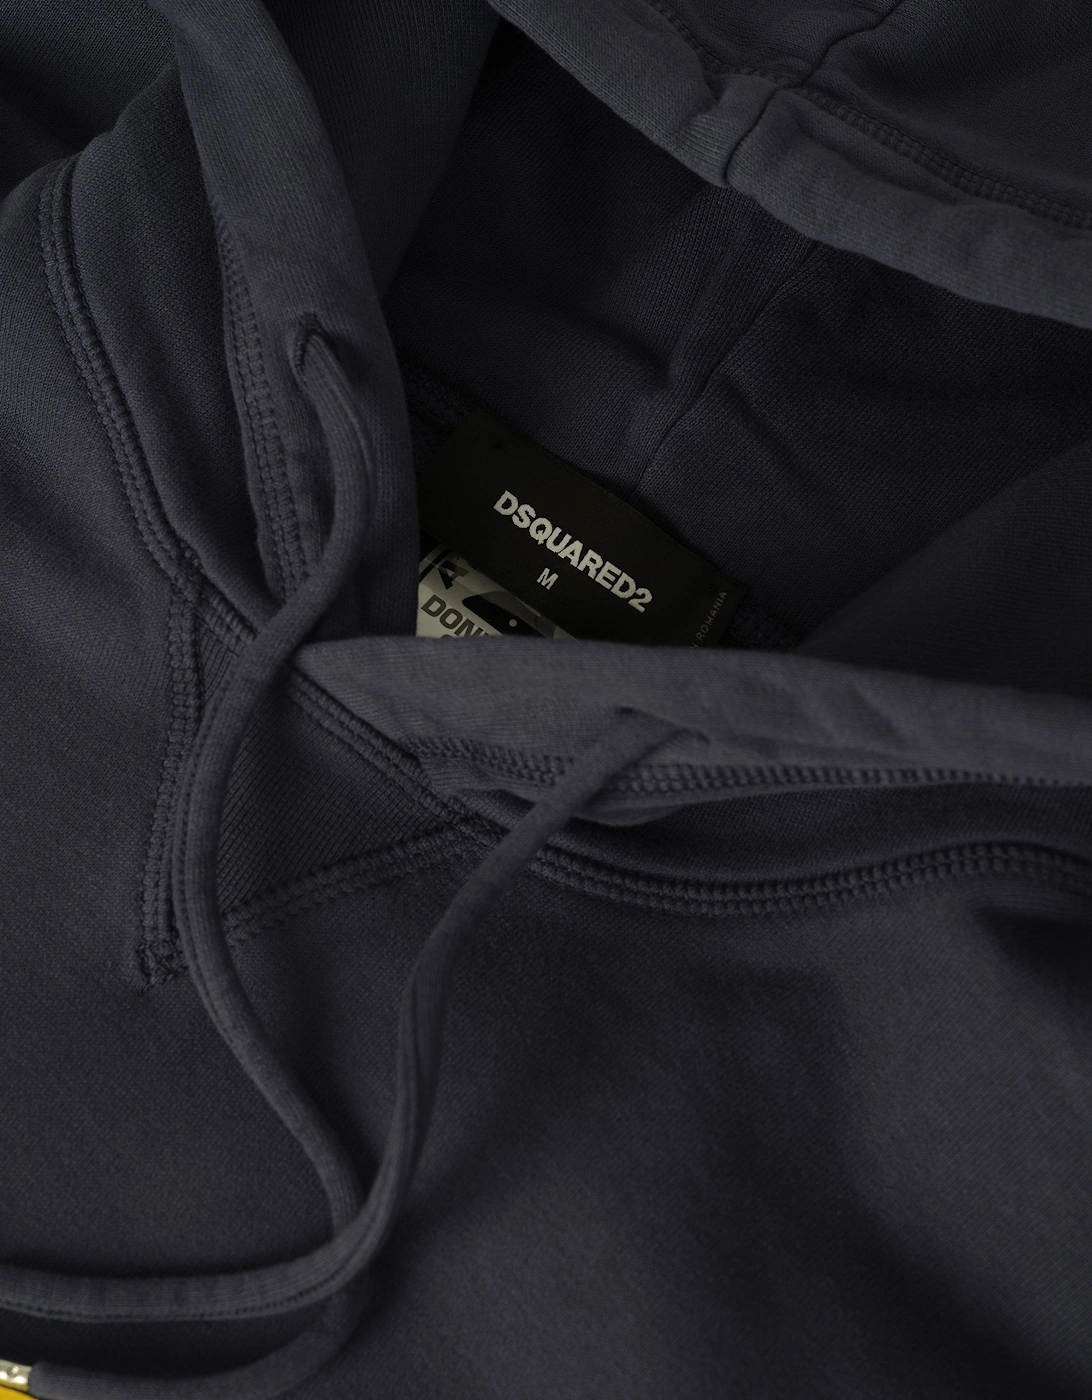 DSQ2 Hooded Top